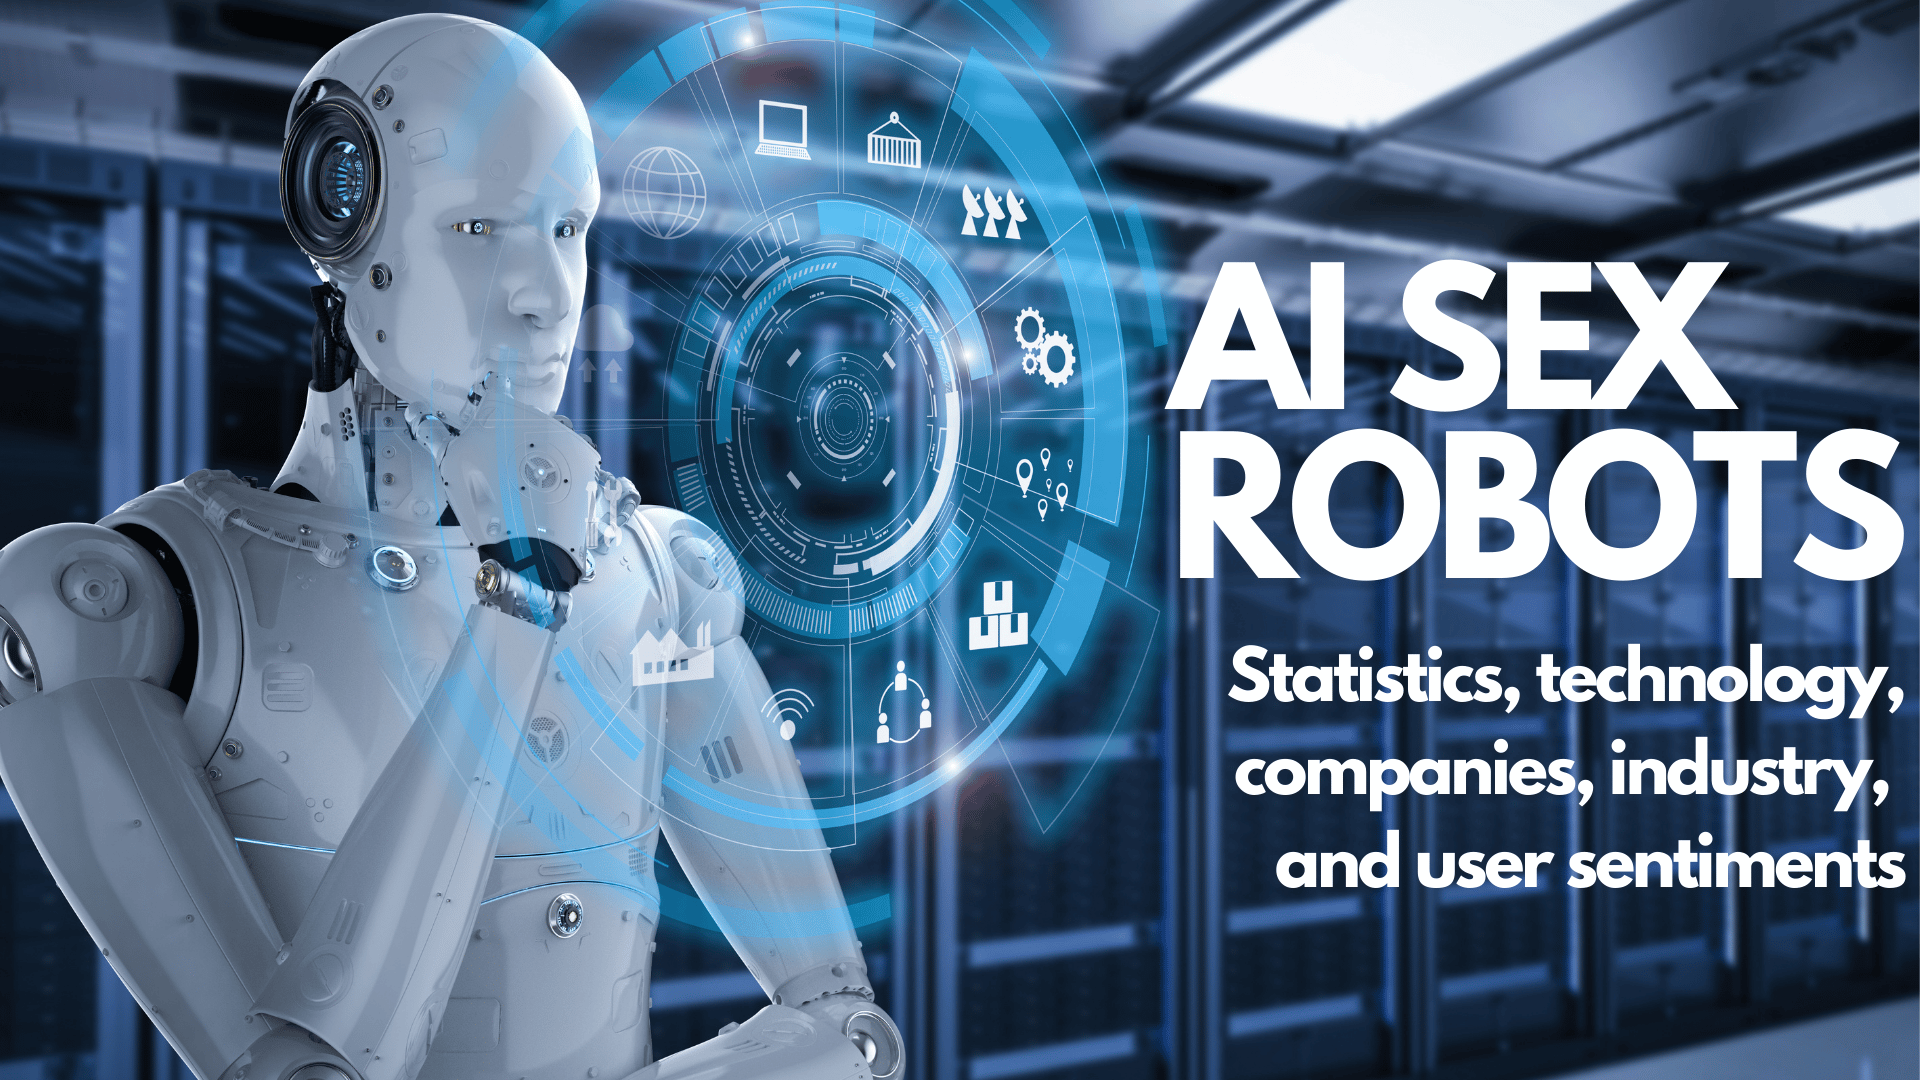 Sex Robot Industry: State of Market Size, Technology (AI), User sentiment, and Other Statistics